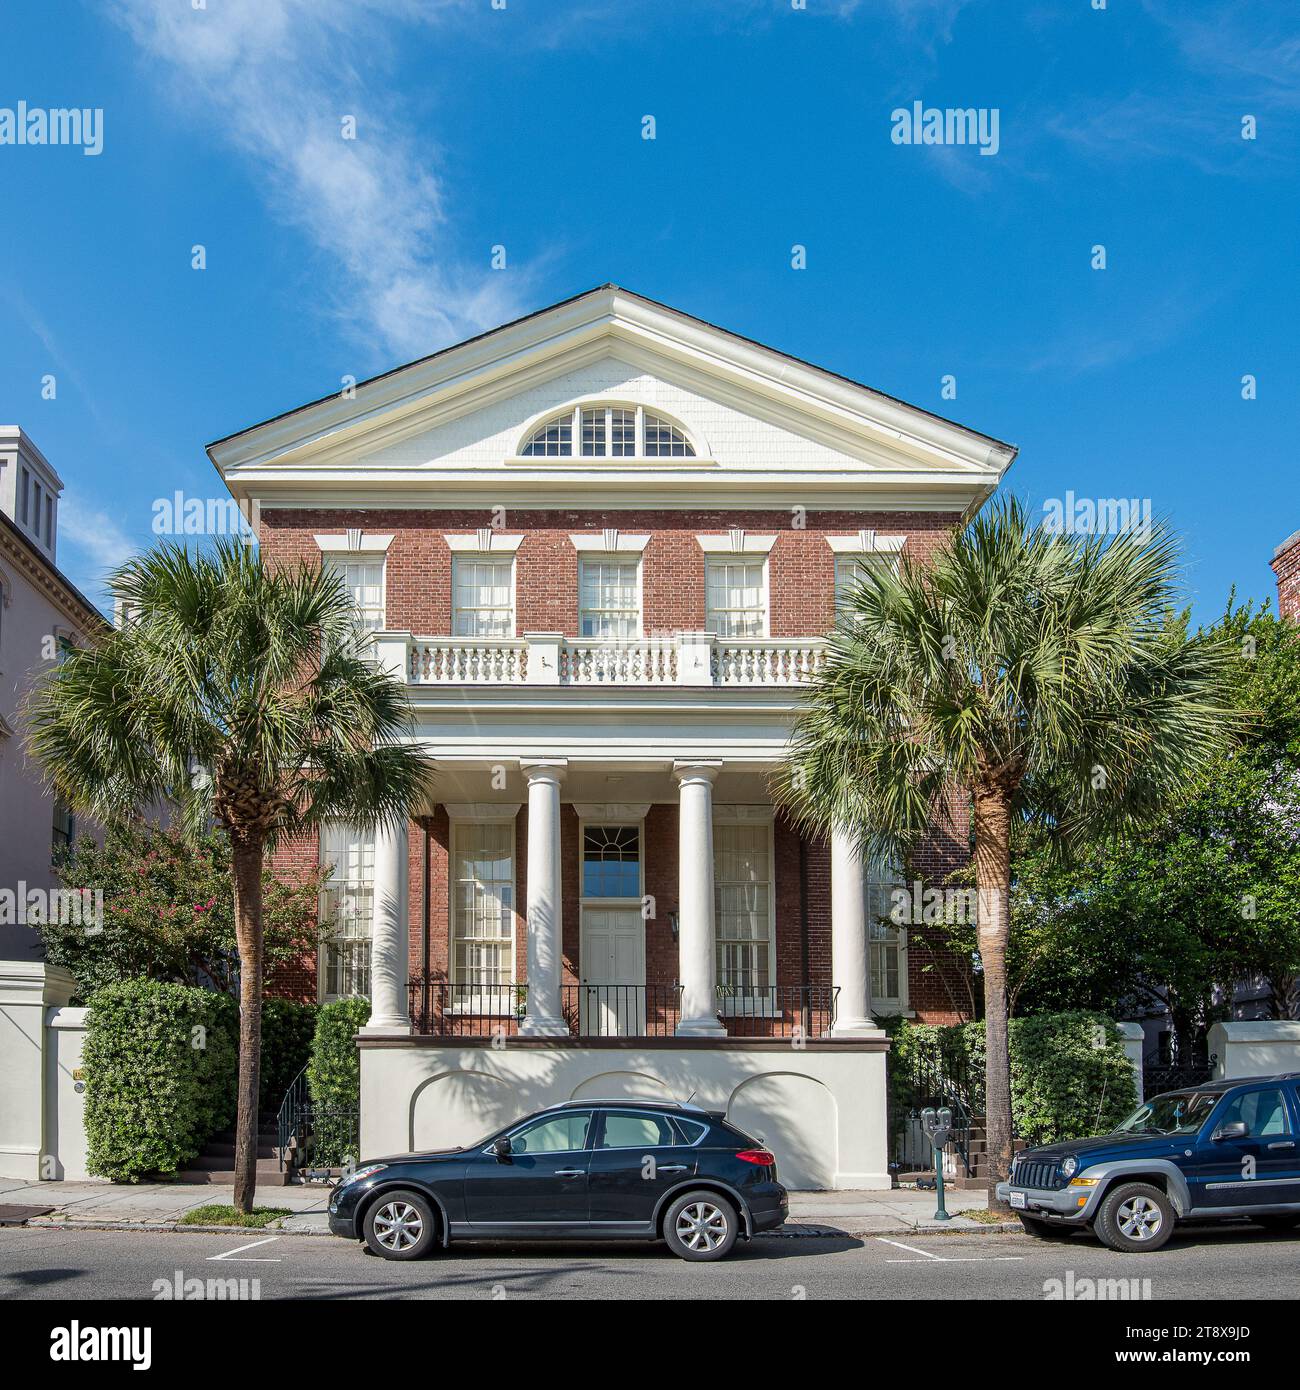 Colonel Thomas Pinckney House (1829) in Charleston, SC is an example of historic residential architecturein Charleston, SC Stock Photo